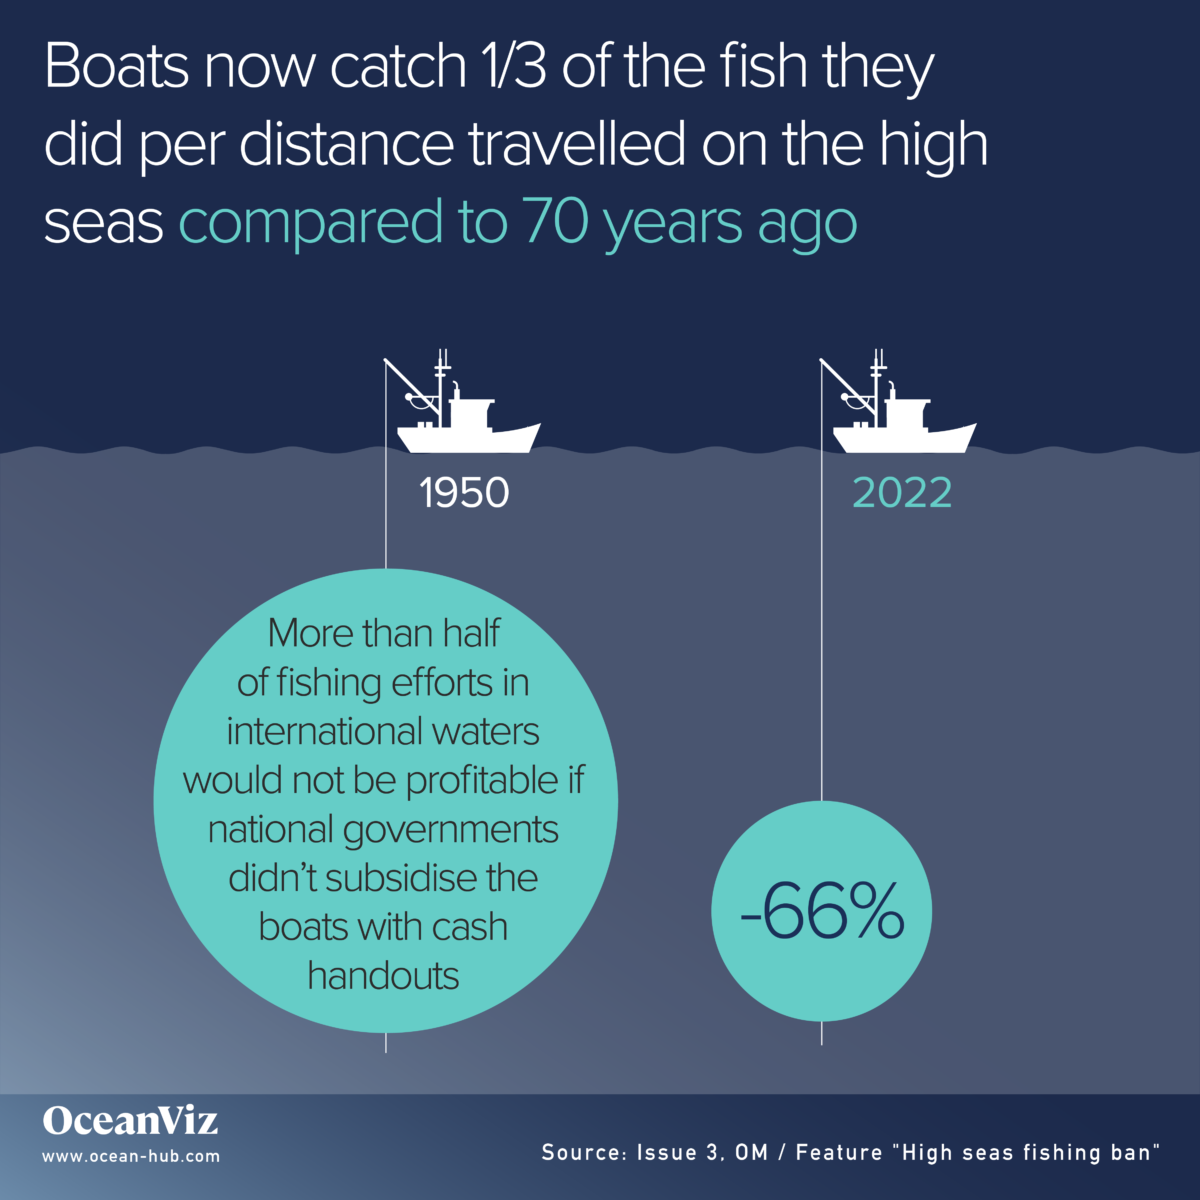 Decline in catch on high seas in past 70 years